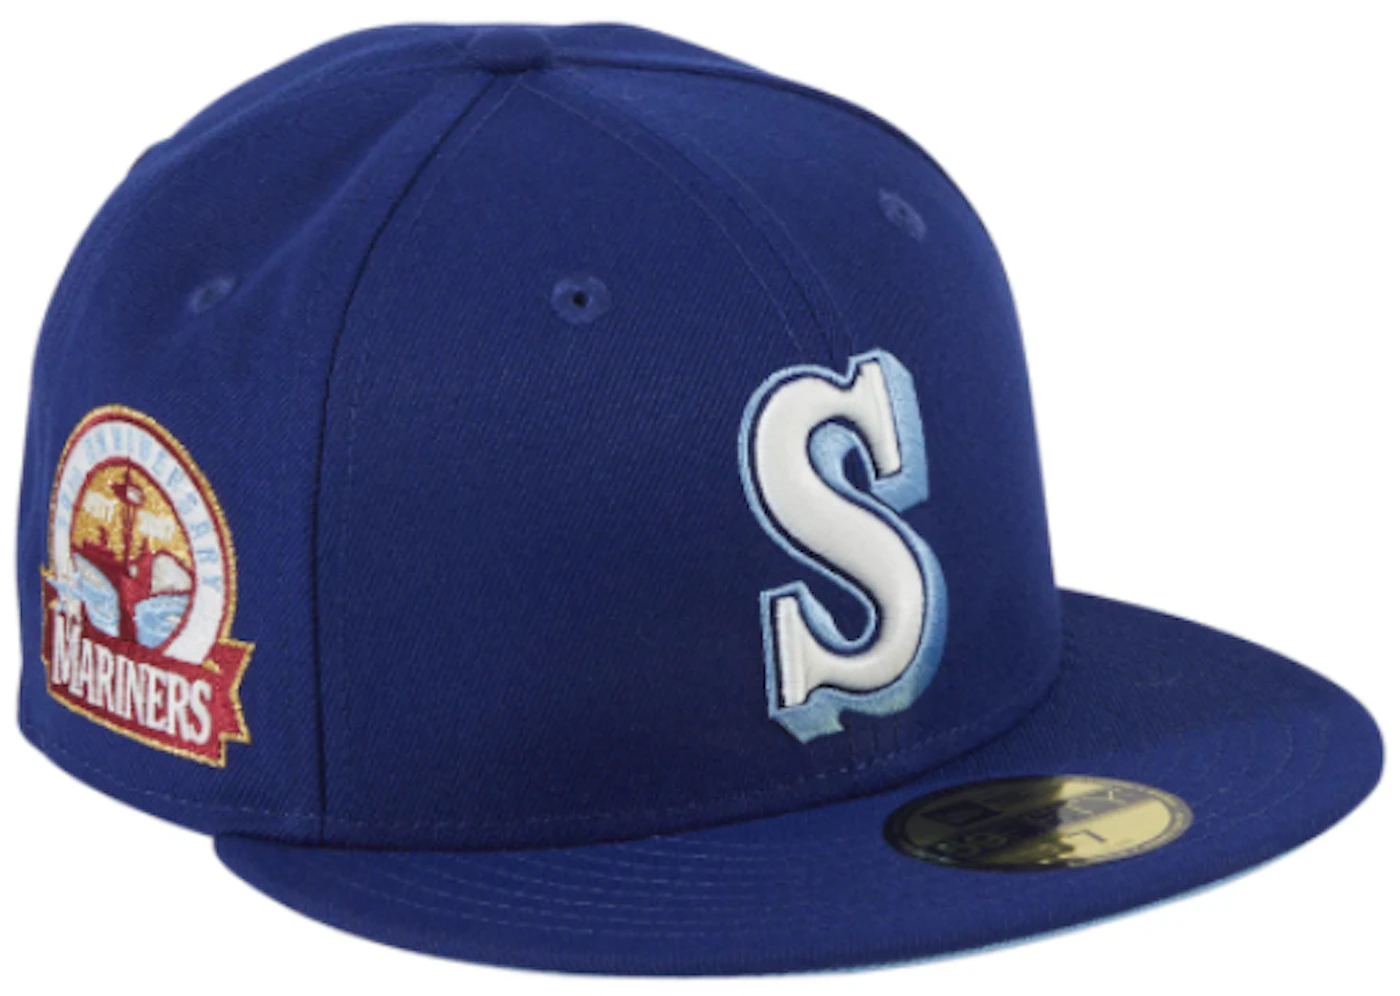 New Era New Era 59 Fifty AC Perf Alt Seattle Mariners Fitted Hat